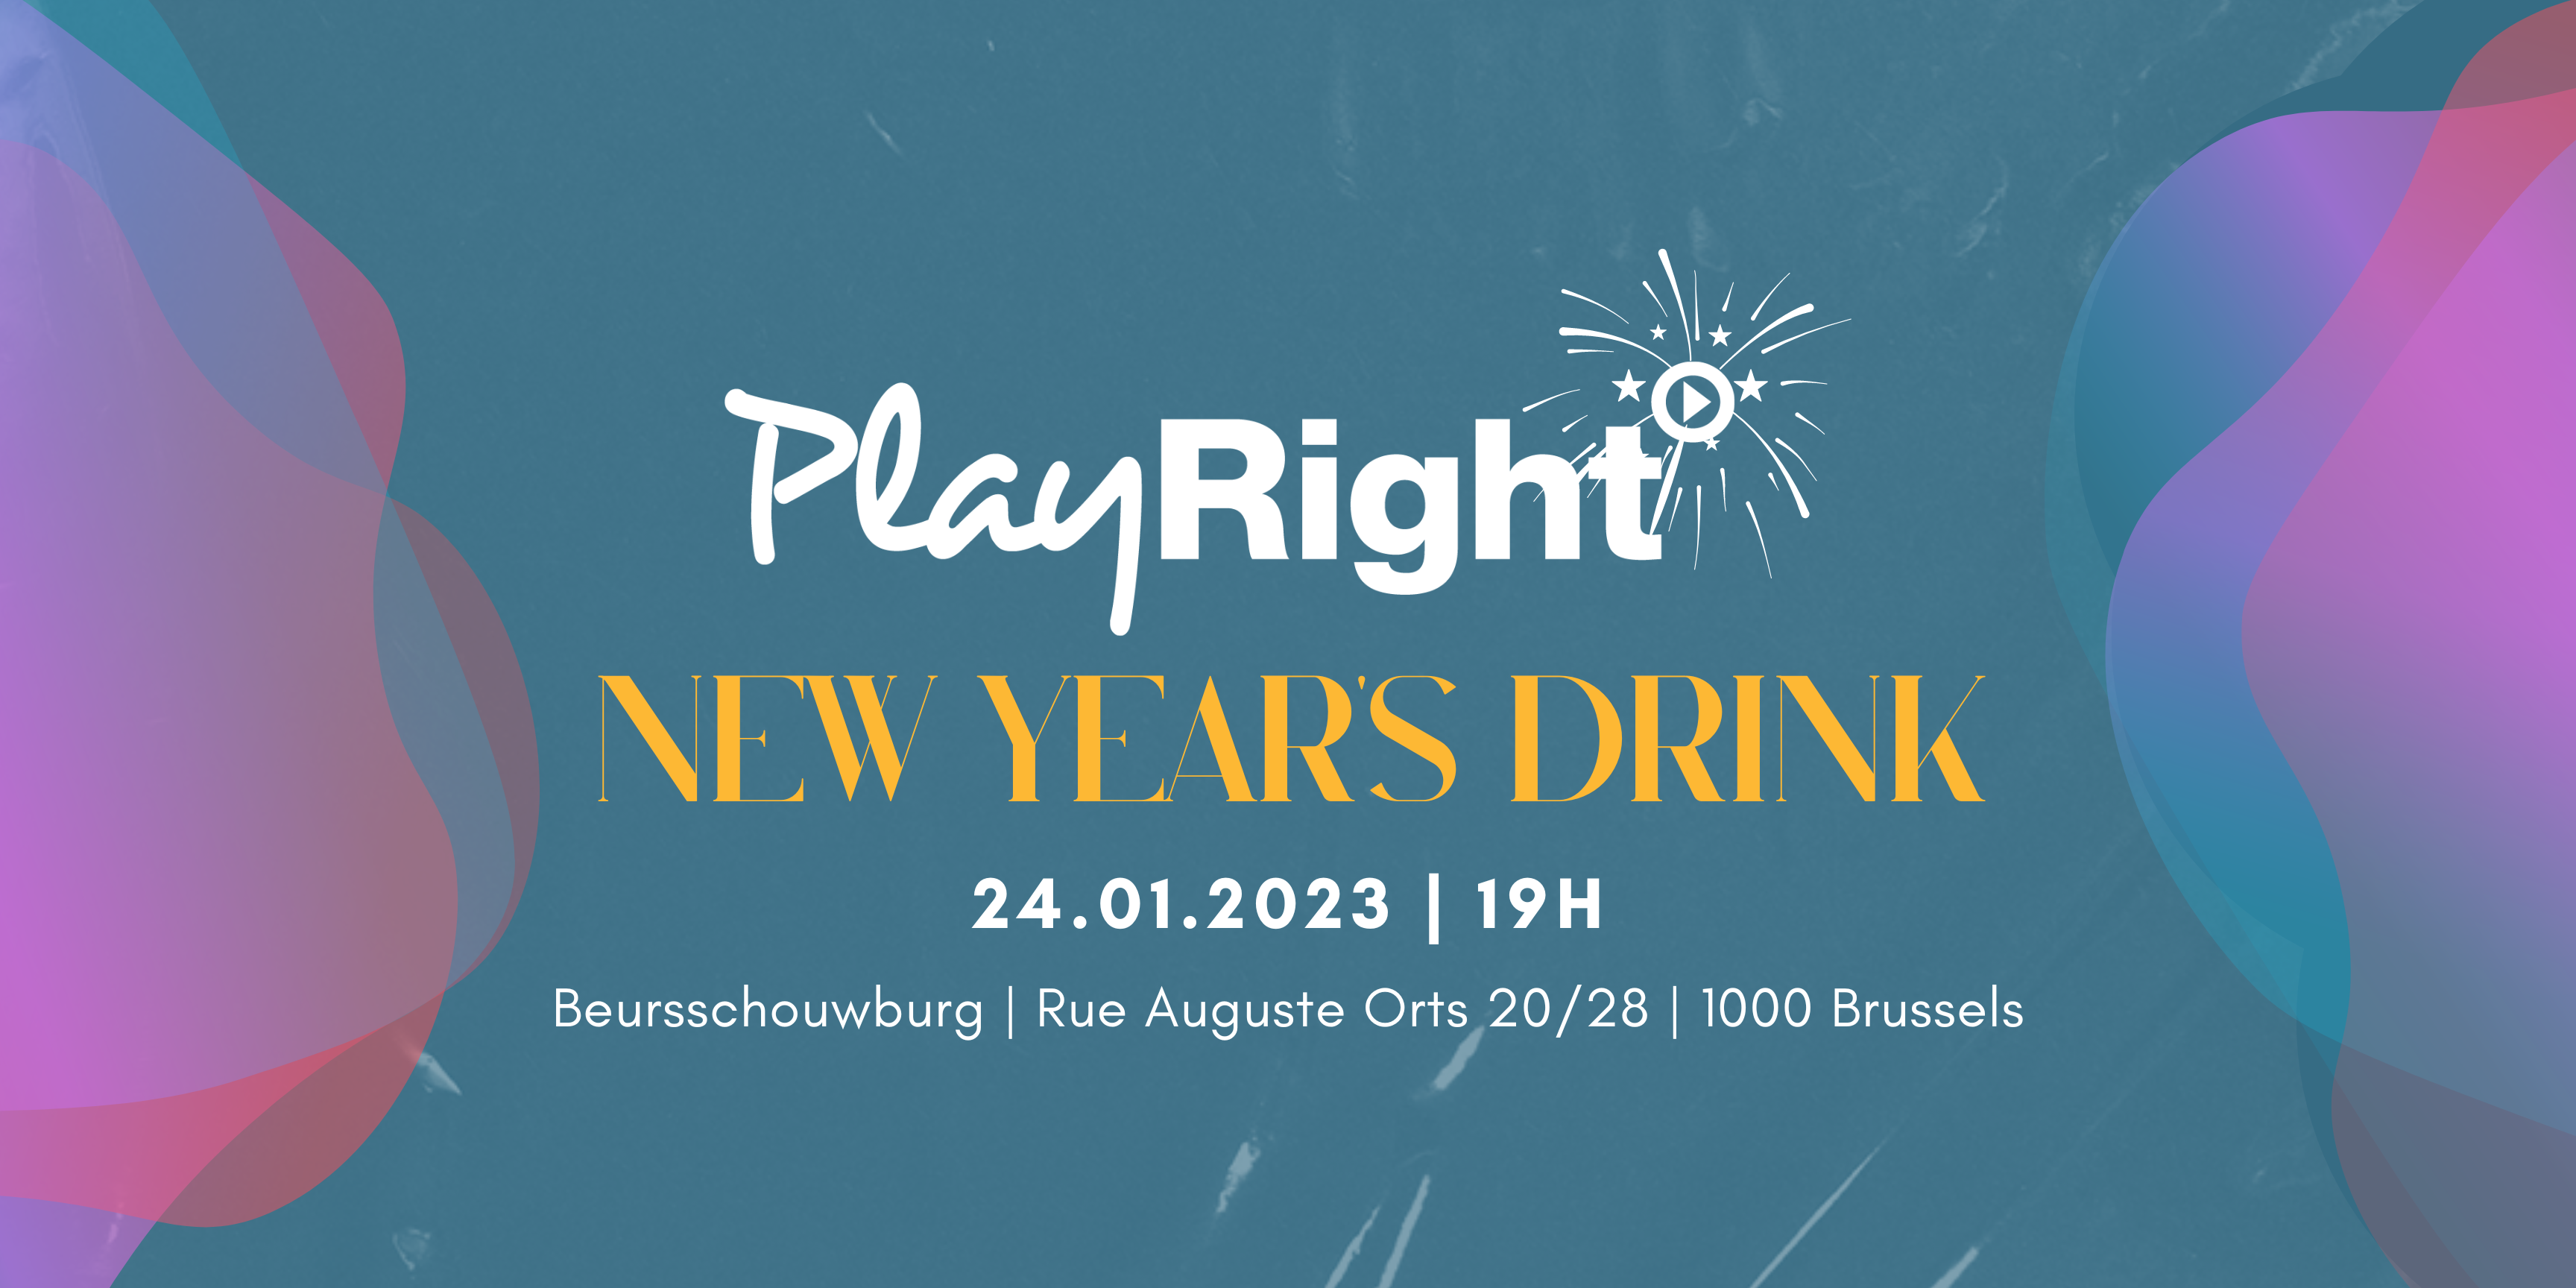 RSVP for our New Year’s drink